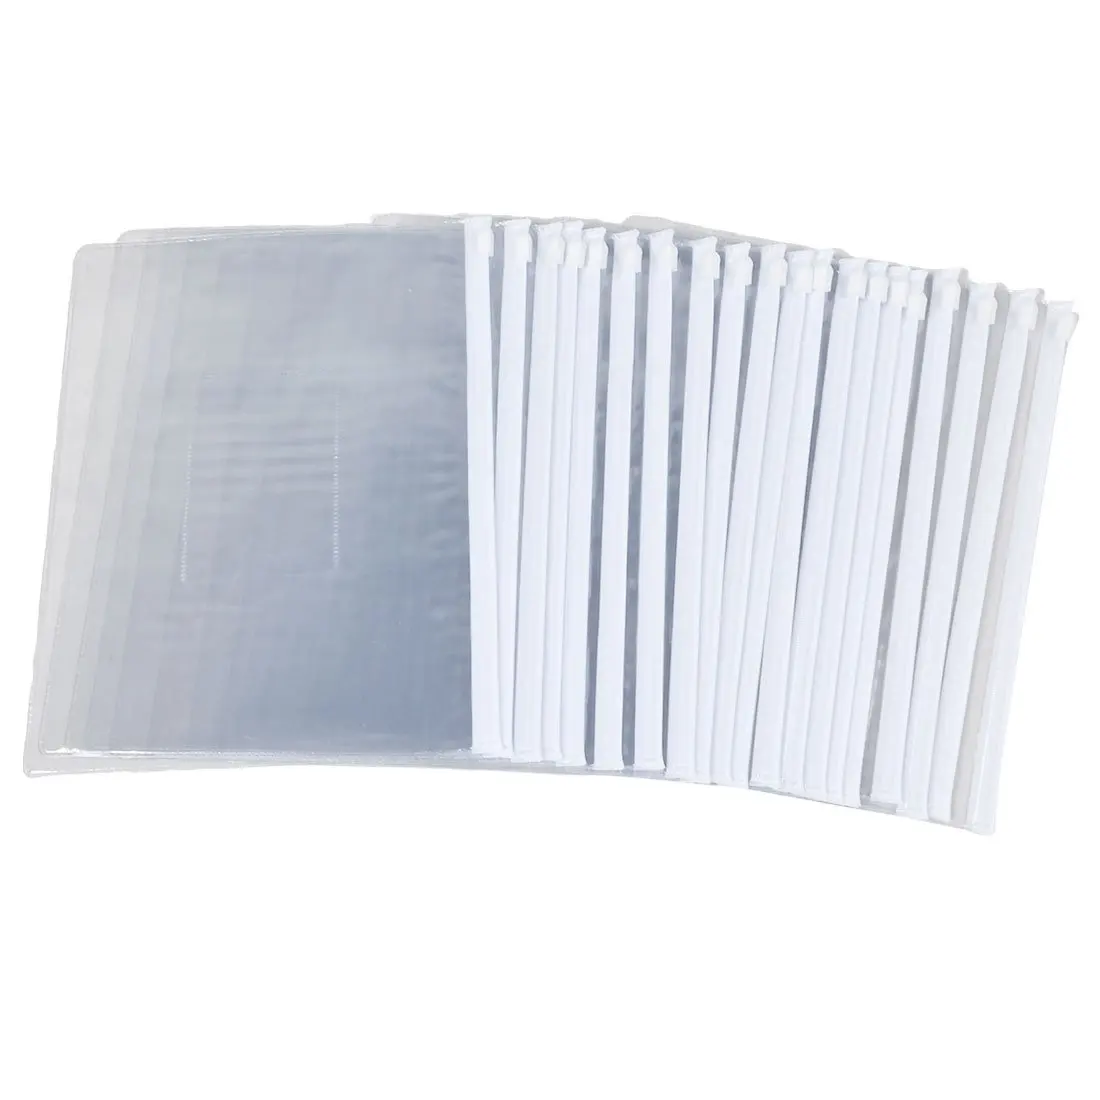 White Clear Size A5 Paper Slider Zip Closure Folders Files Bags 20 Pcs R SODIAL 